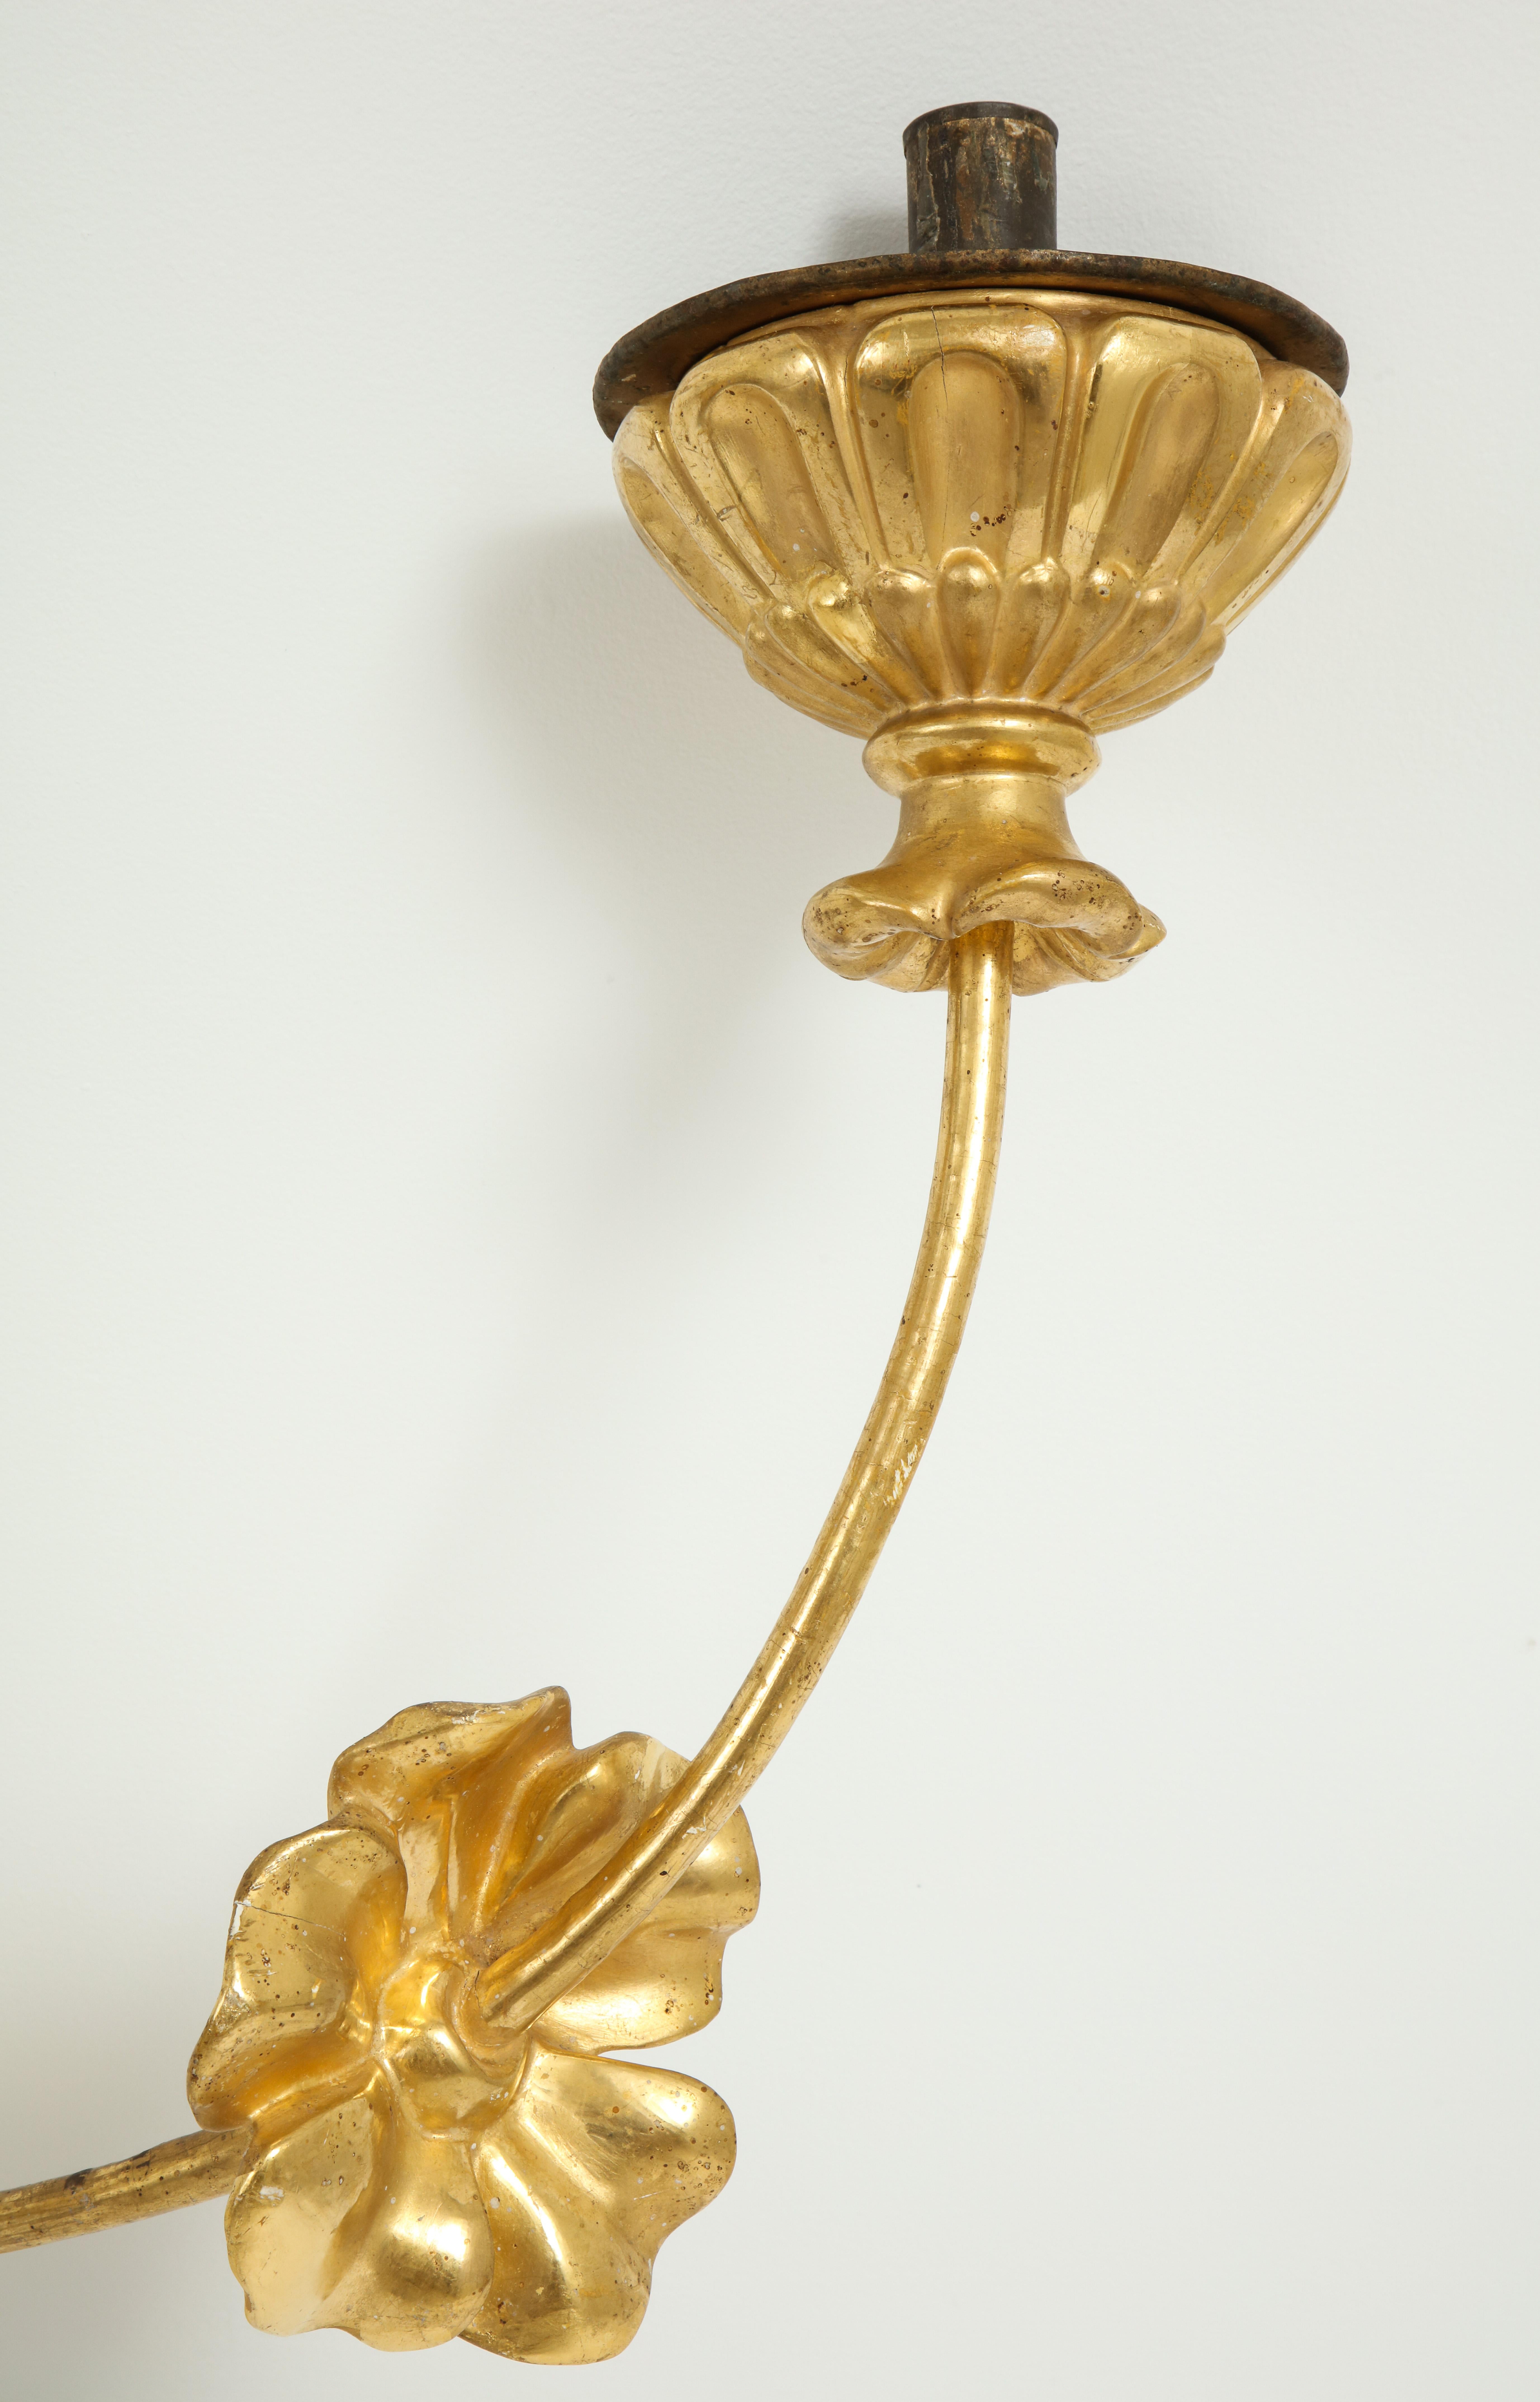 Late 18th Century Pair of Neoclassic Italian Carved and Gilded Iron Wall Sconces